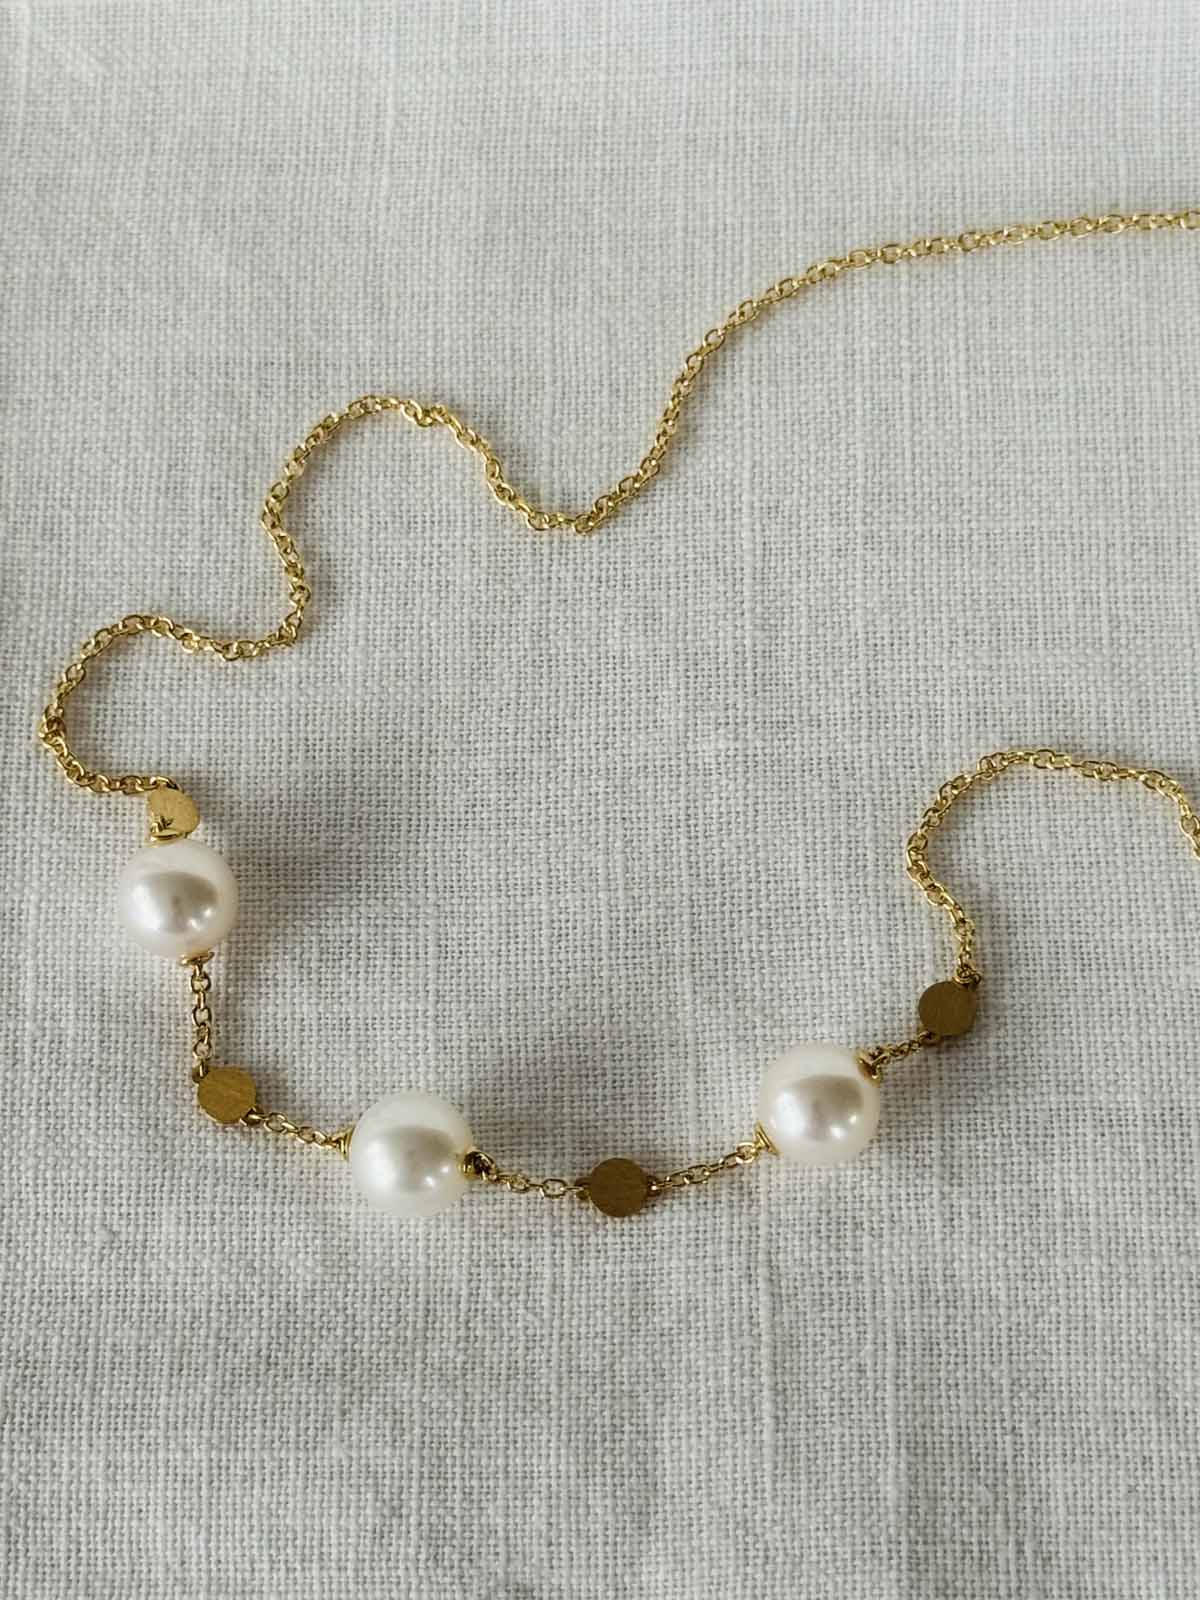 Dazzling Droplets - Necklace with Pearls